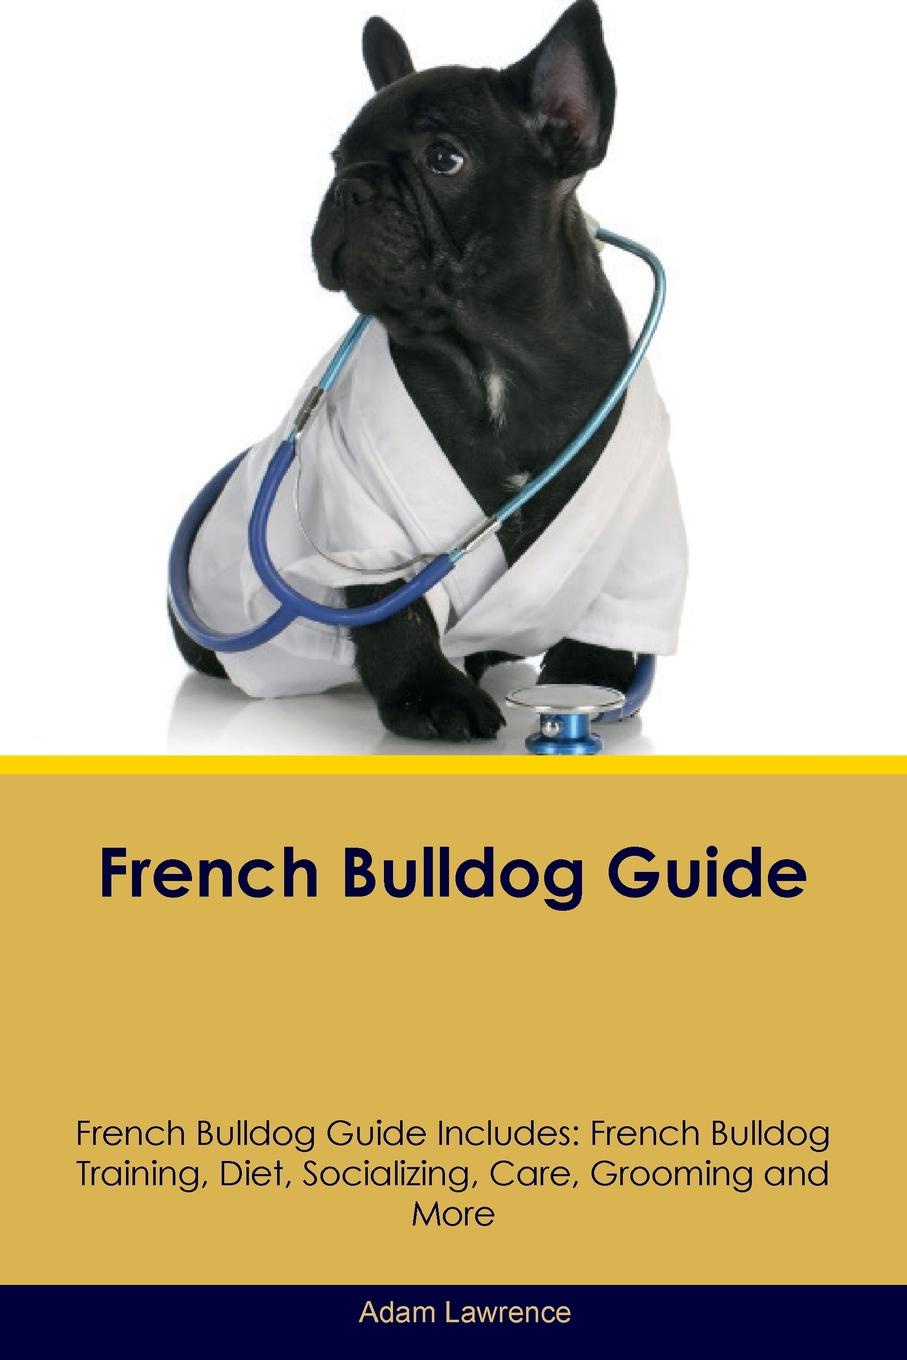 French Bulldog Guide French Bulldog Guide Includes. French Bulldog Training, Diet, Socializing, Care, Grooming, Breeding and More